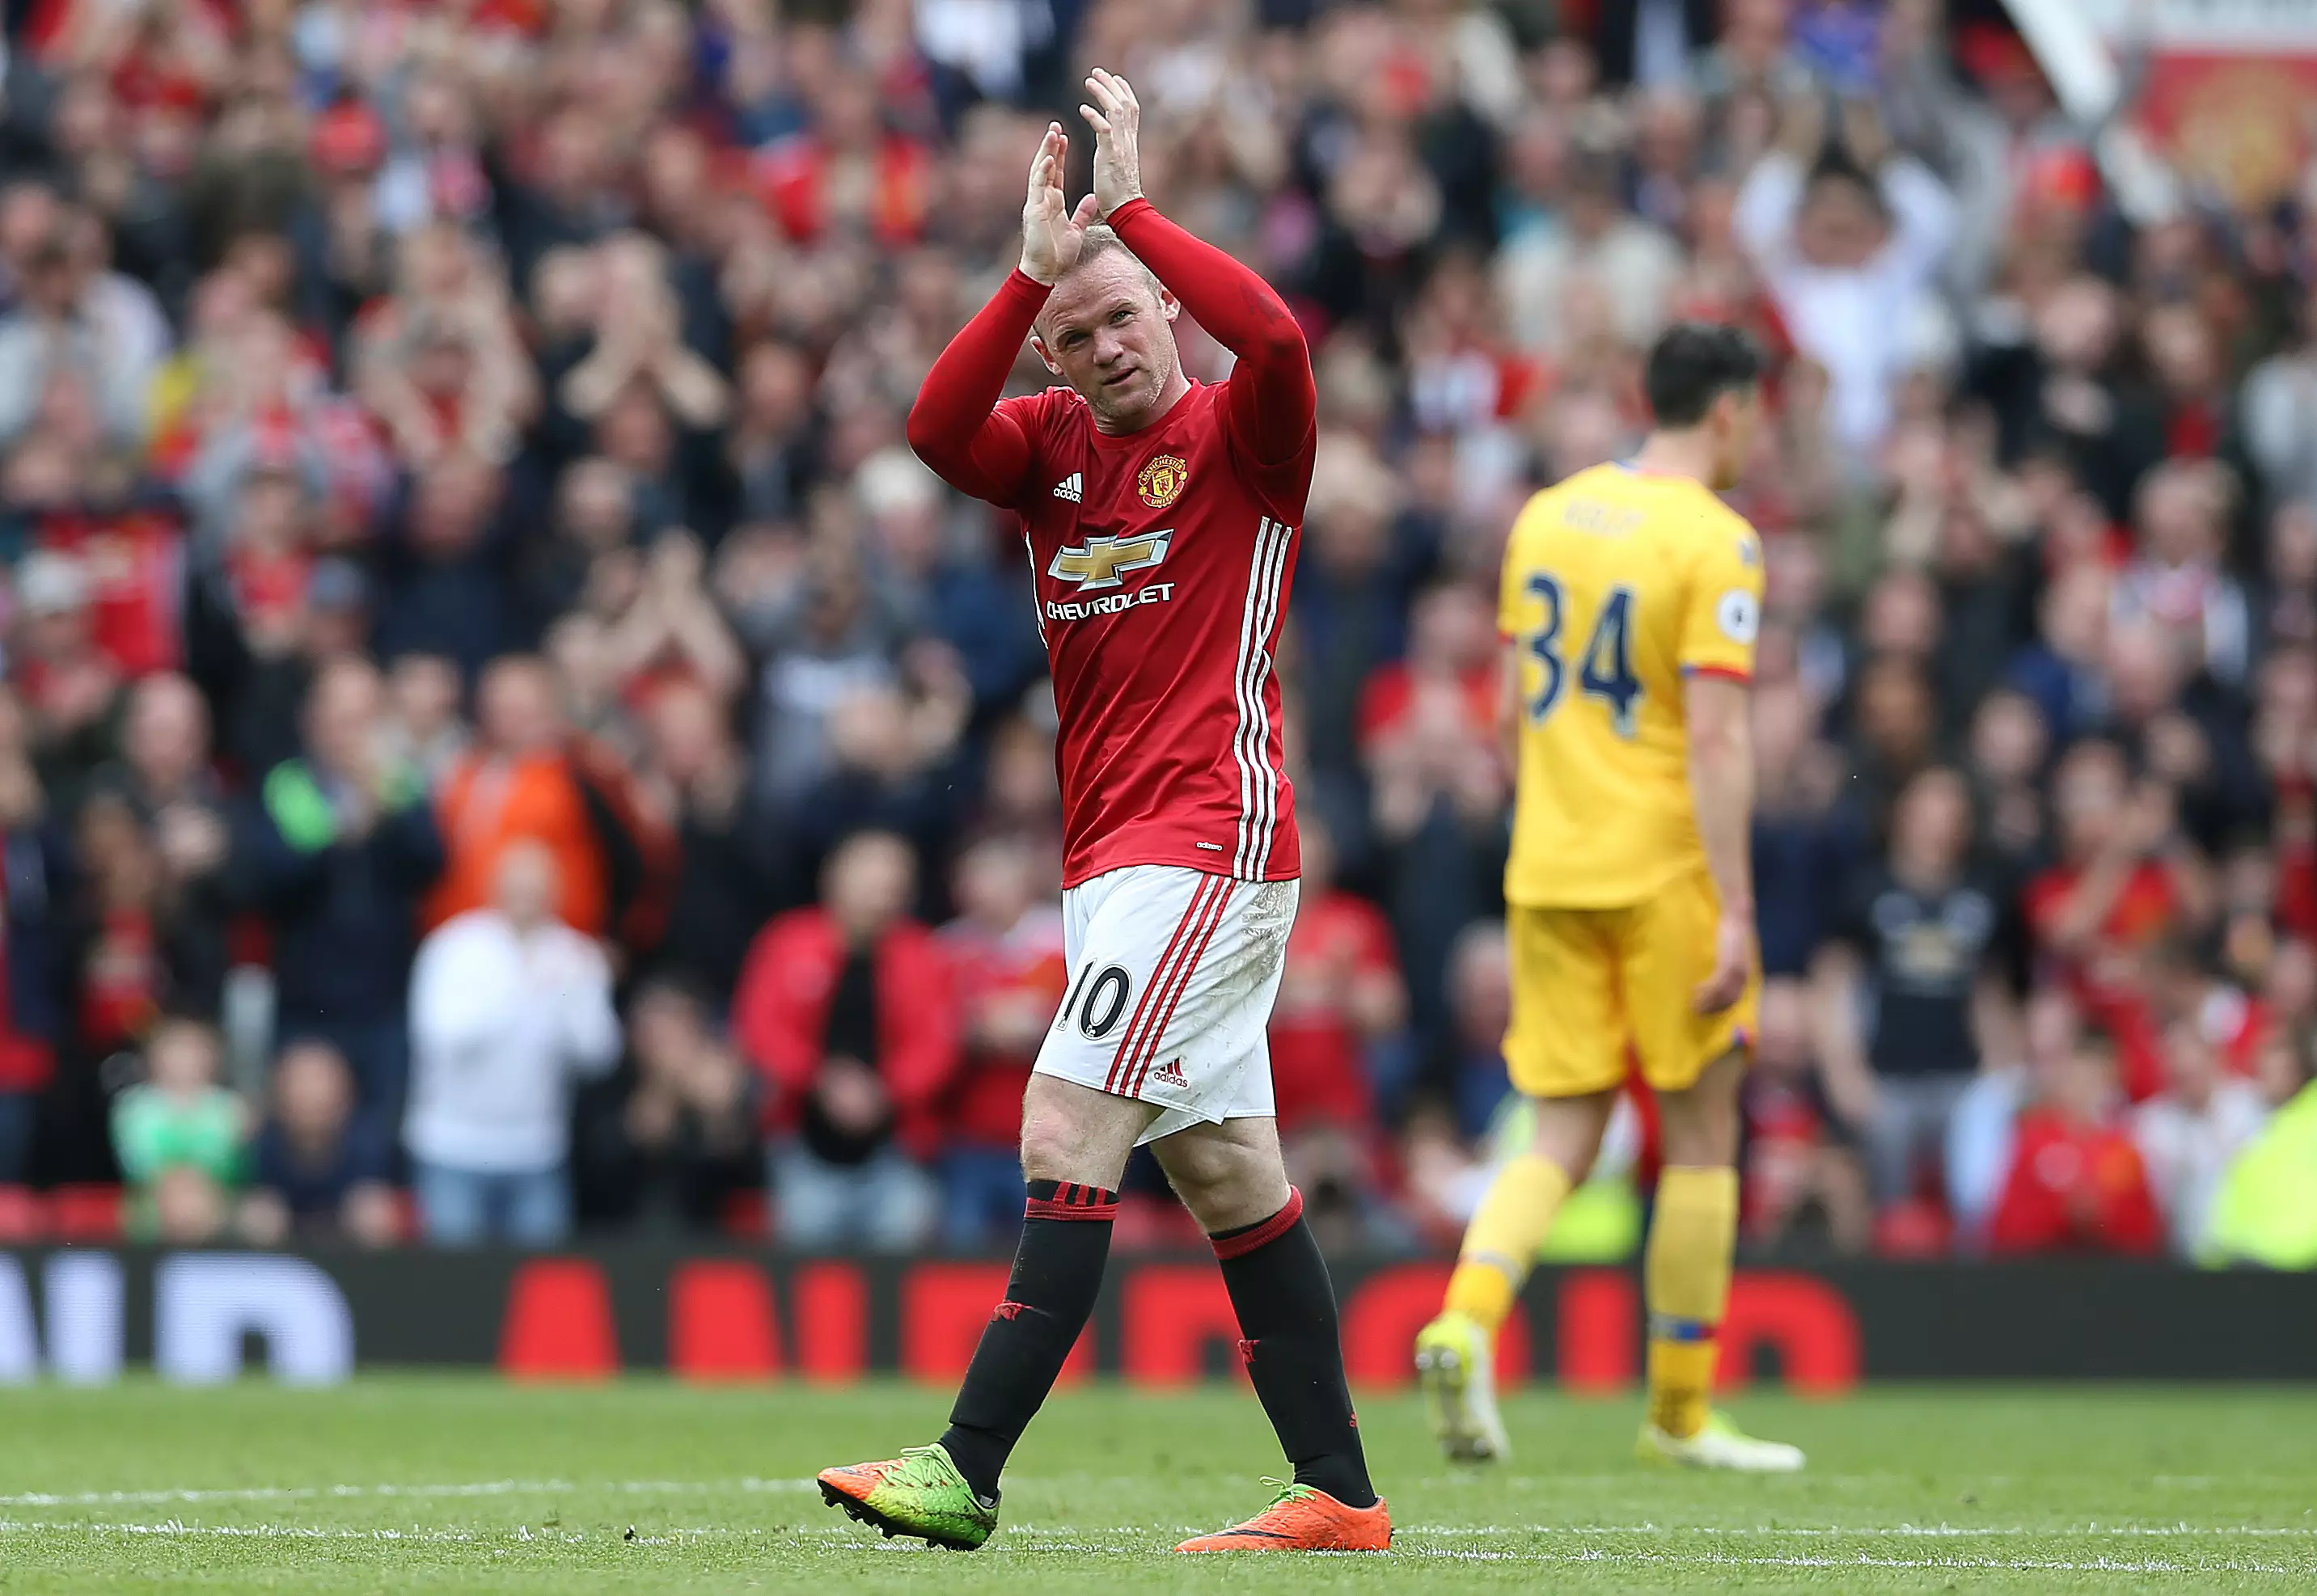 Rooney says farewell to the United fans. Image: PA Images